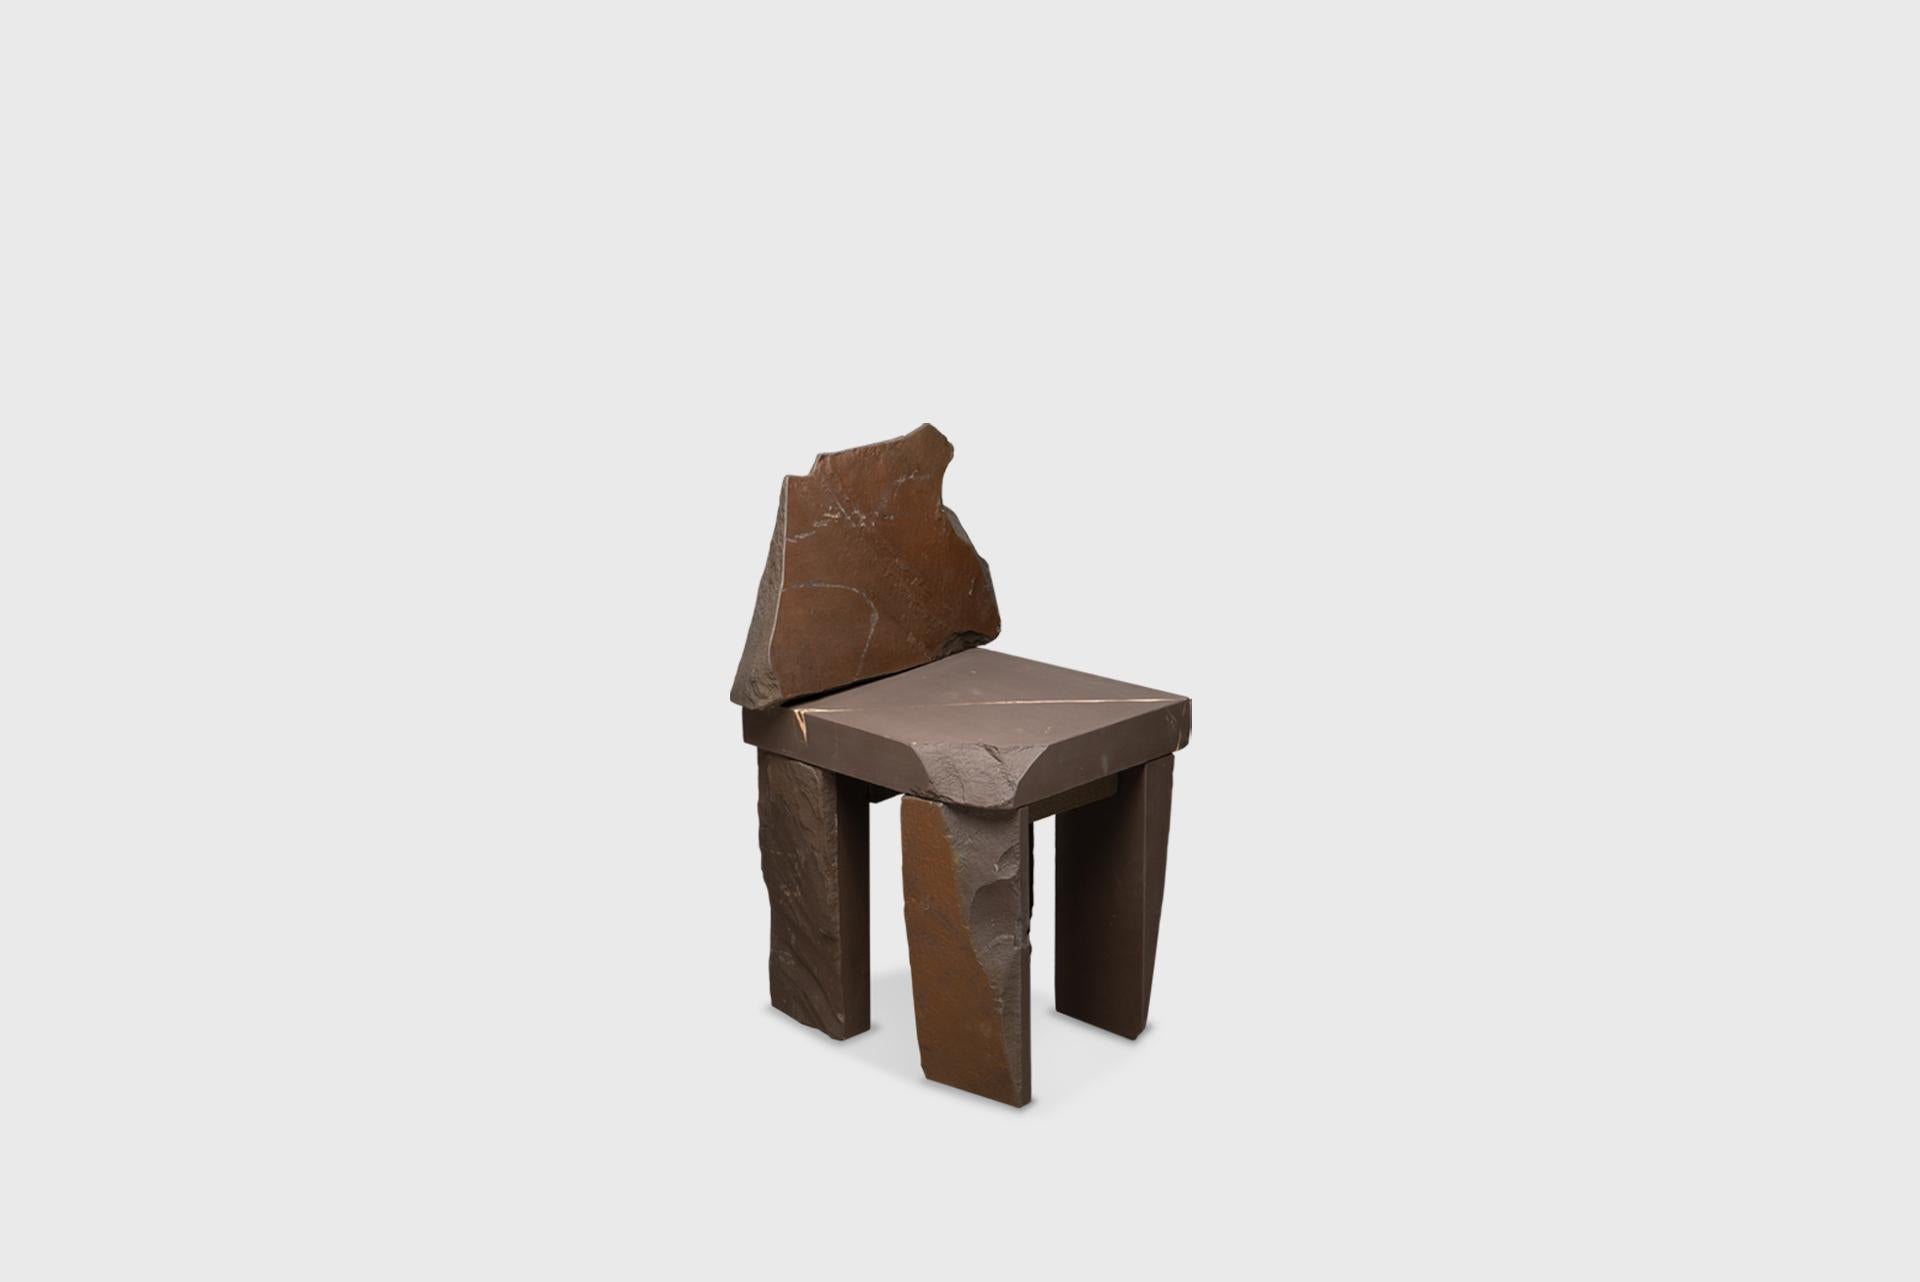 Contemporary Natural Chair 09, Graywacke Offcut Gray Stone, Carsten in der Elst For Sale 5